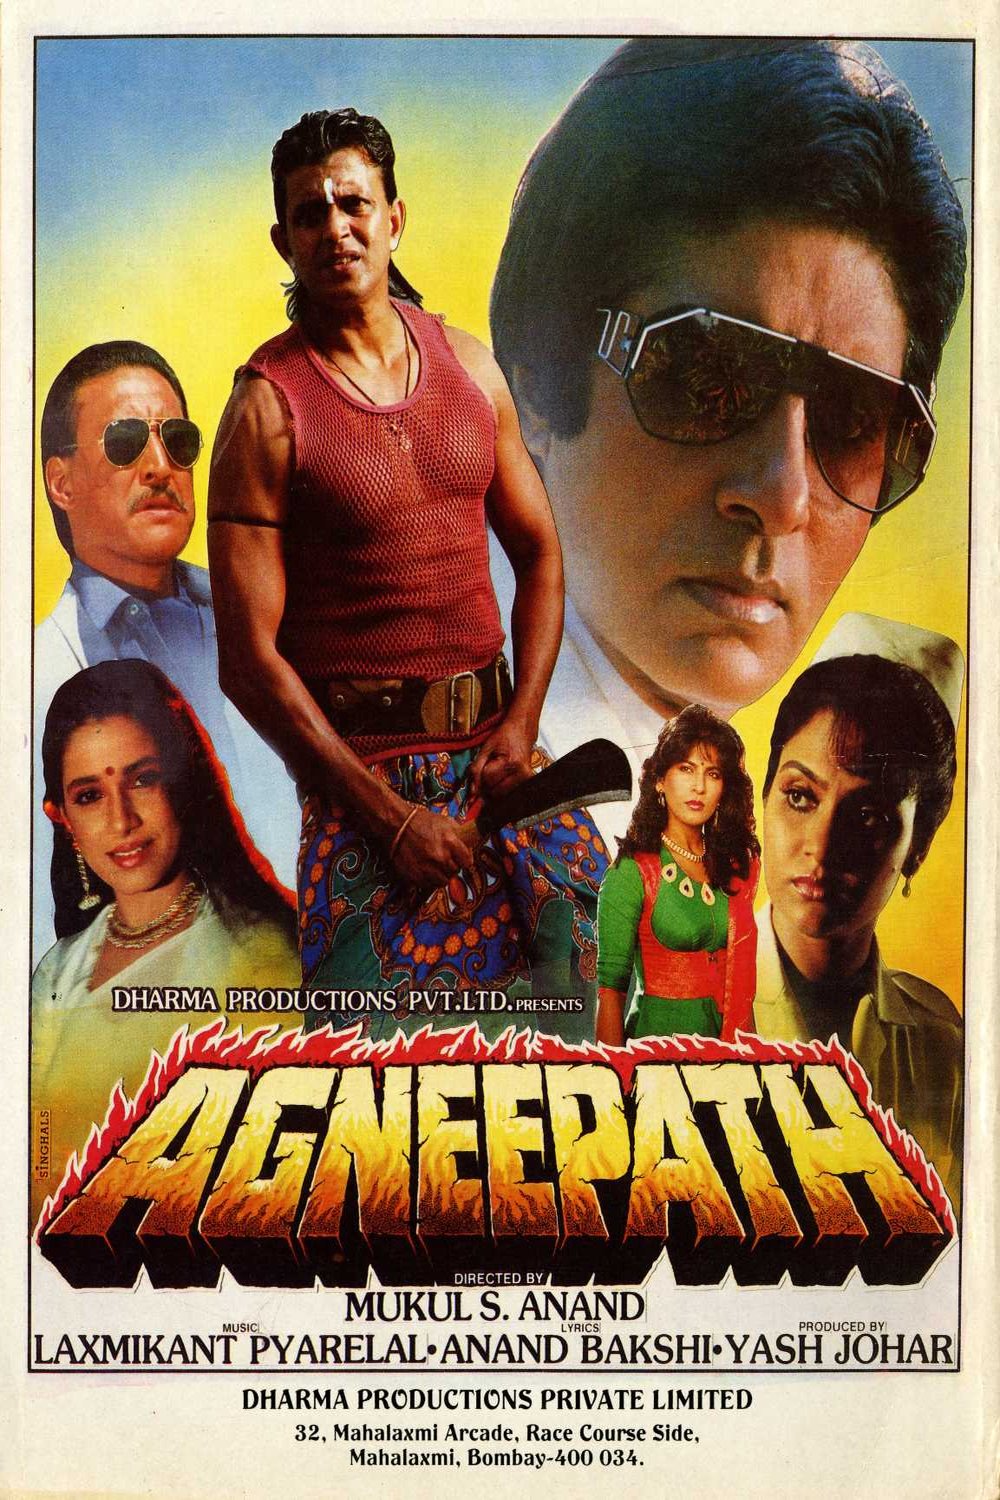 Hindi poster of the movie Agneepath